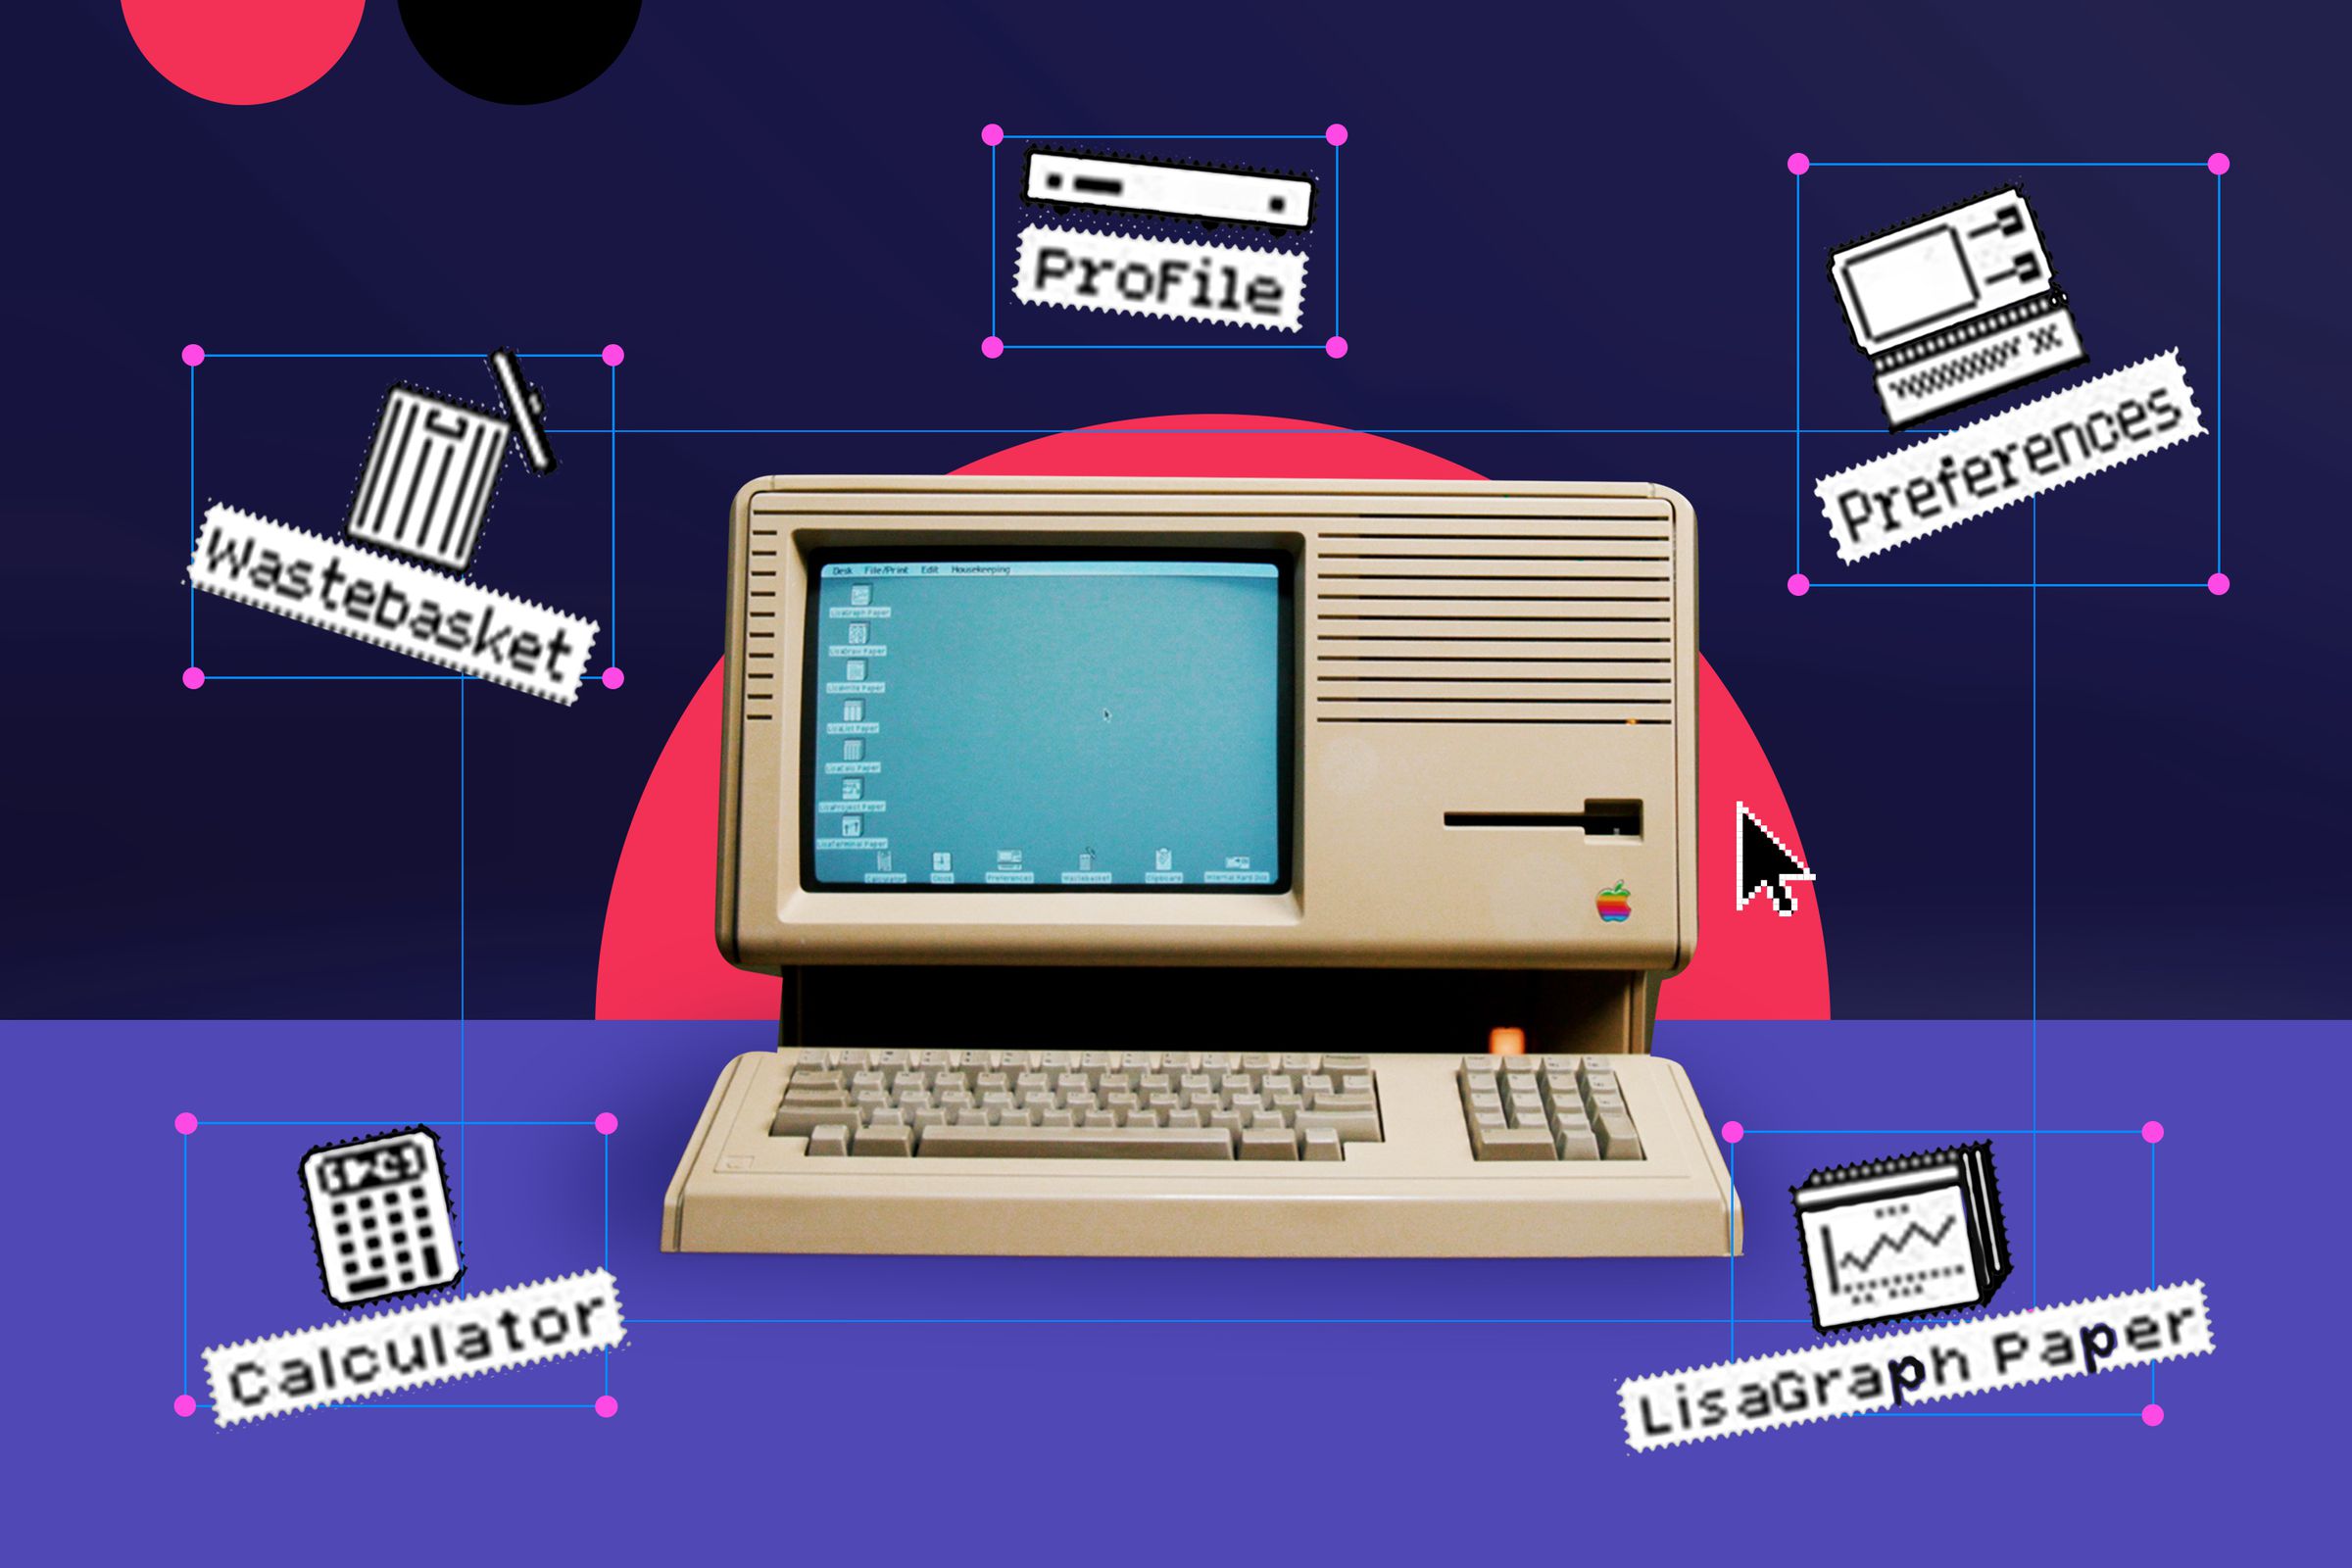 An Apple Lisa against a purple and pink background with desktop icons.